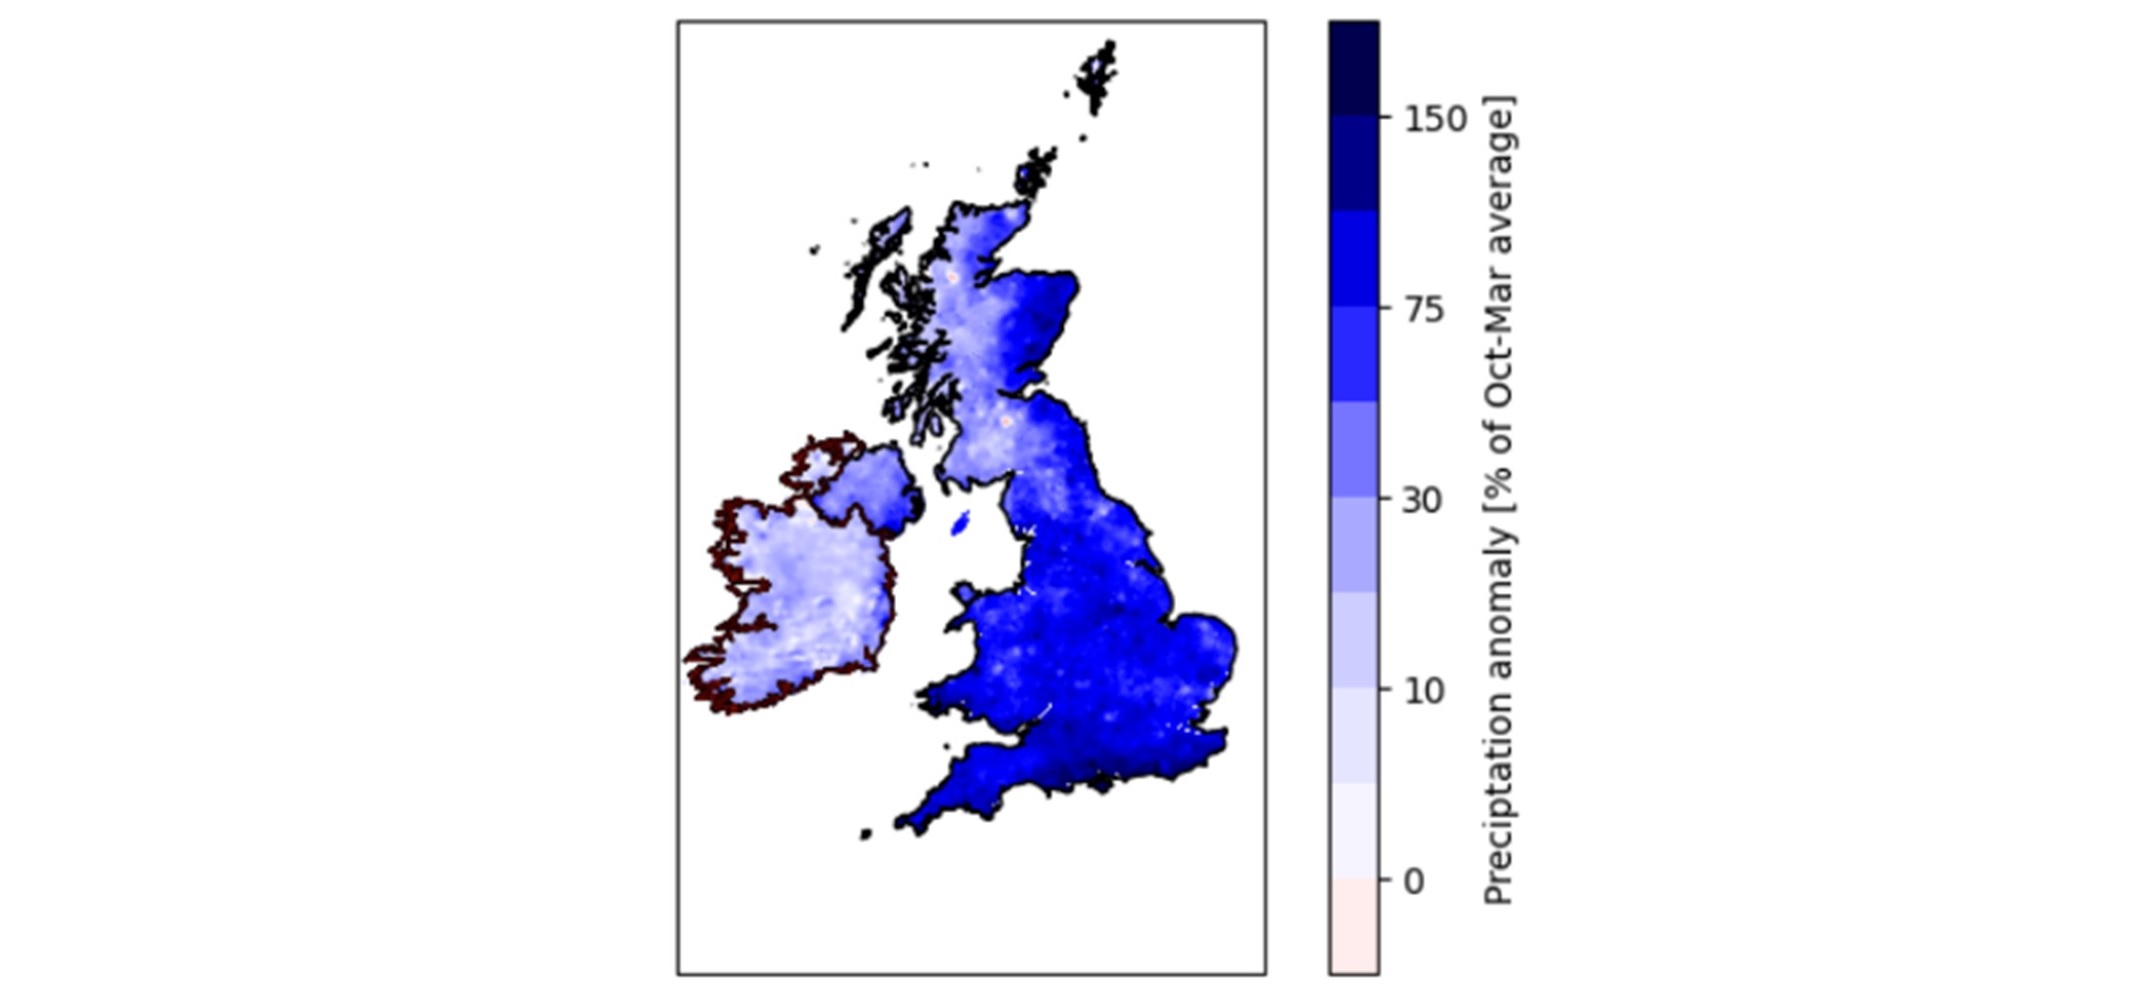 Map of the UK and Ireland showing October 2023 - March 2024 rainfall compared to the 1991/92 - 2020/21 average. It shows dark blues in many regions indicating the significantly wet period between October 2023 and March 2024.